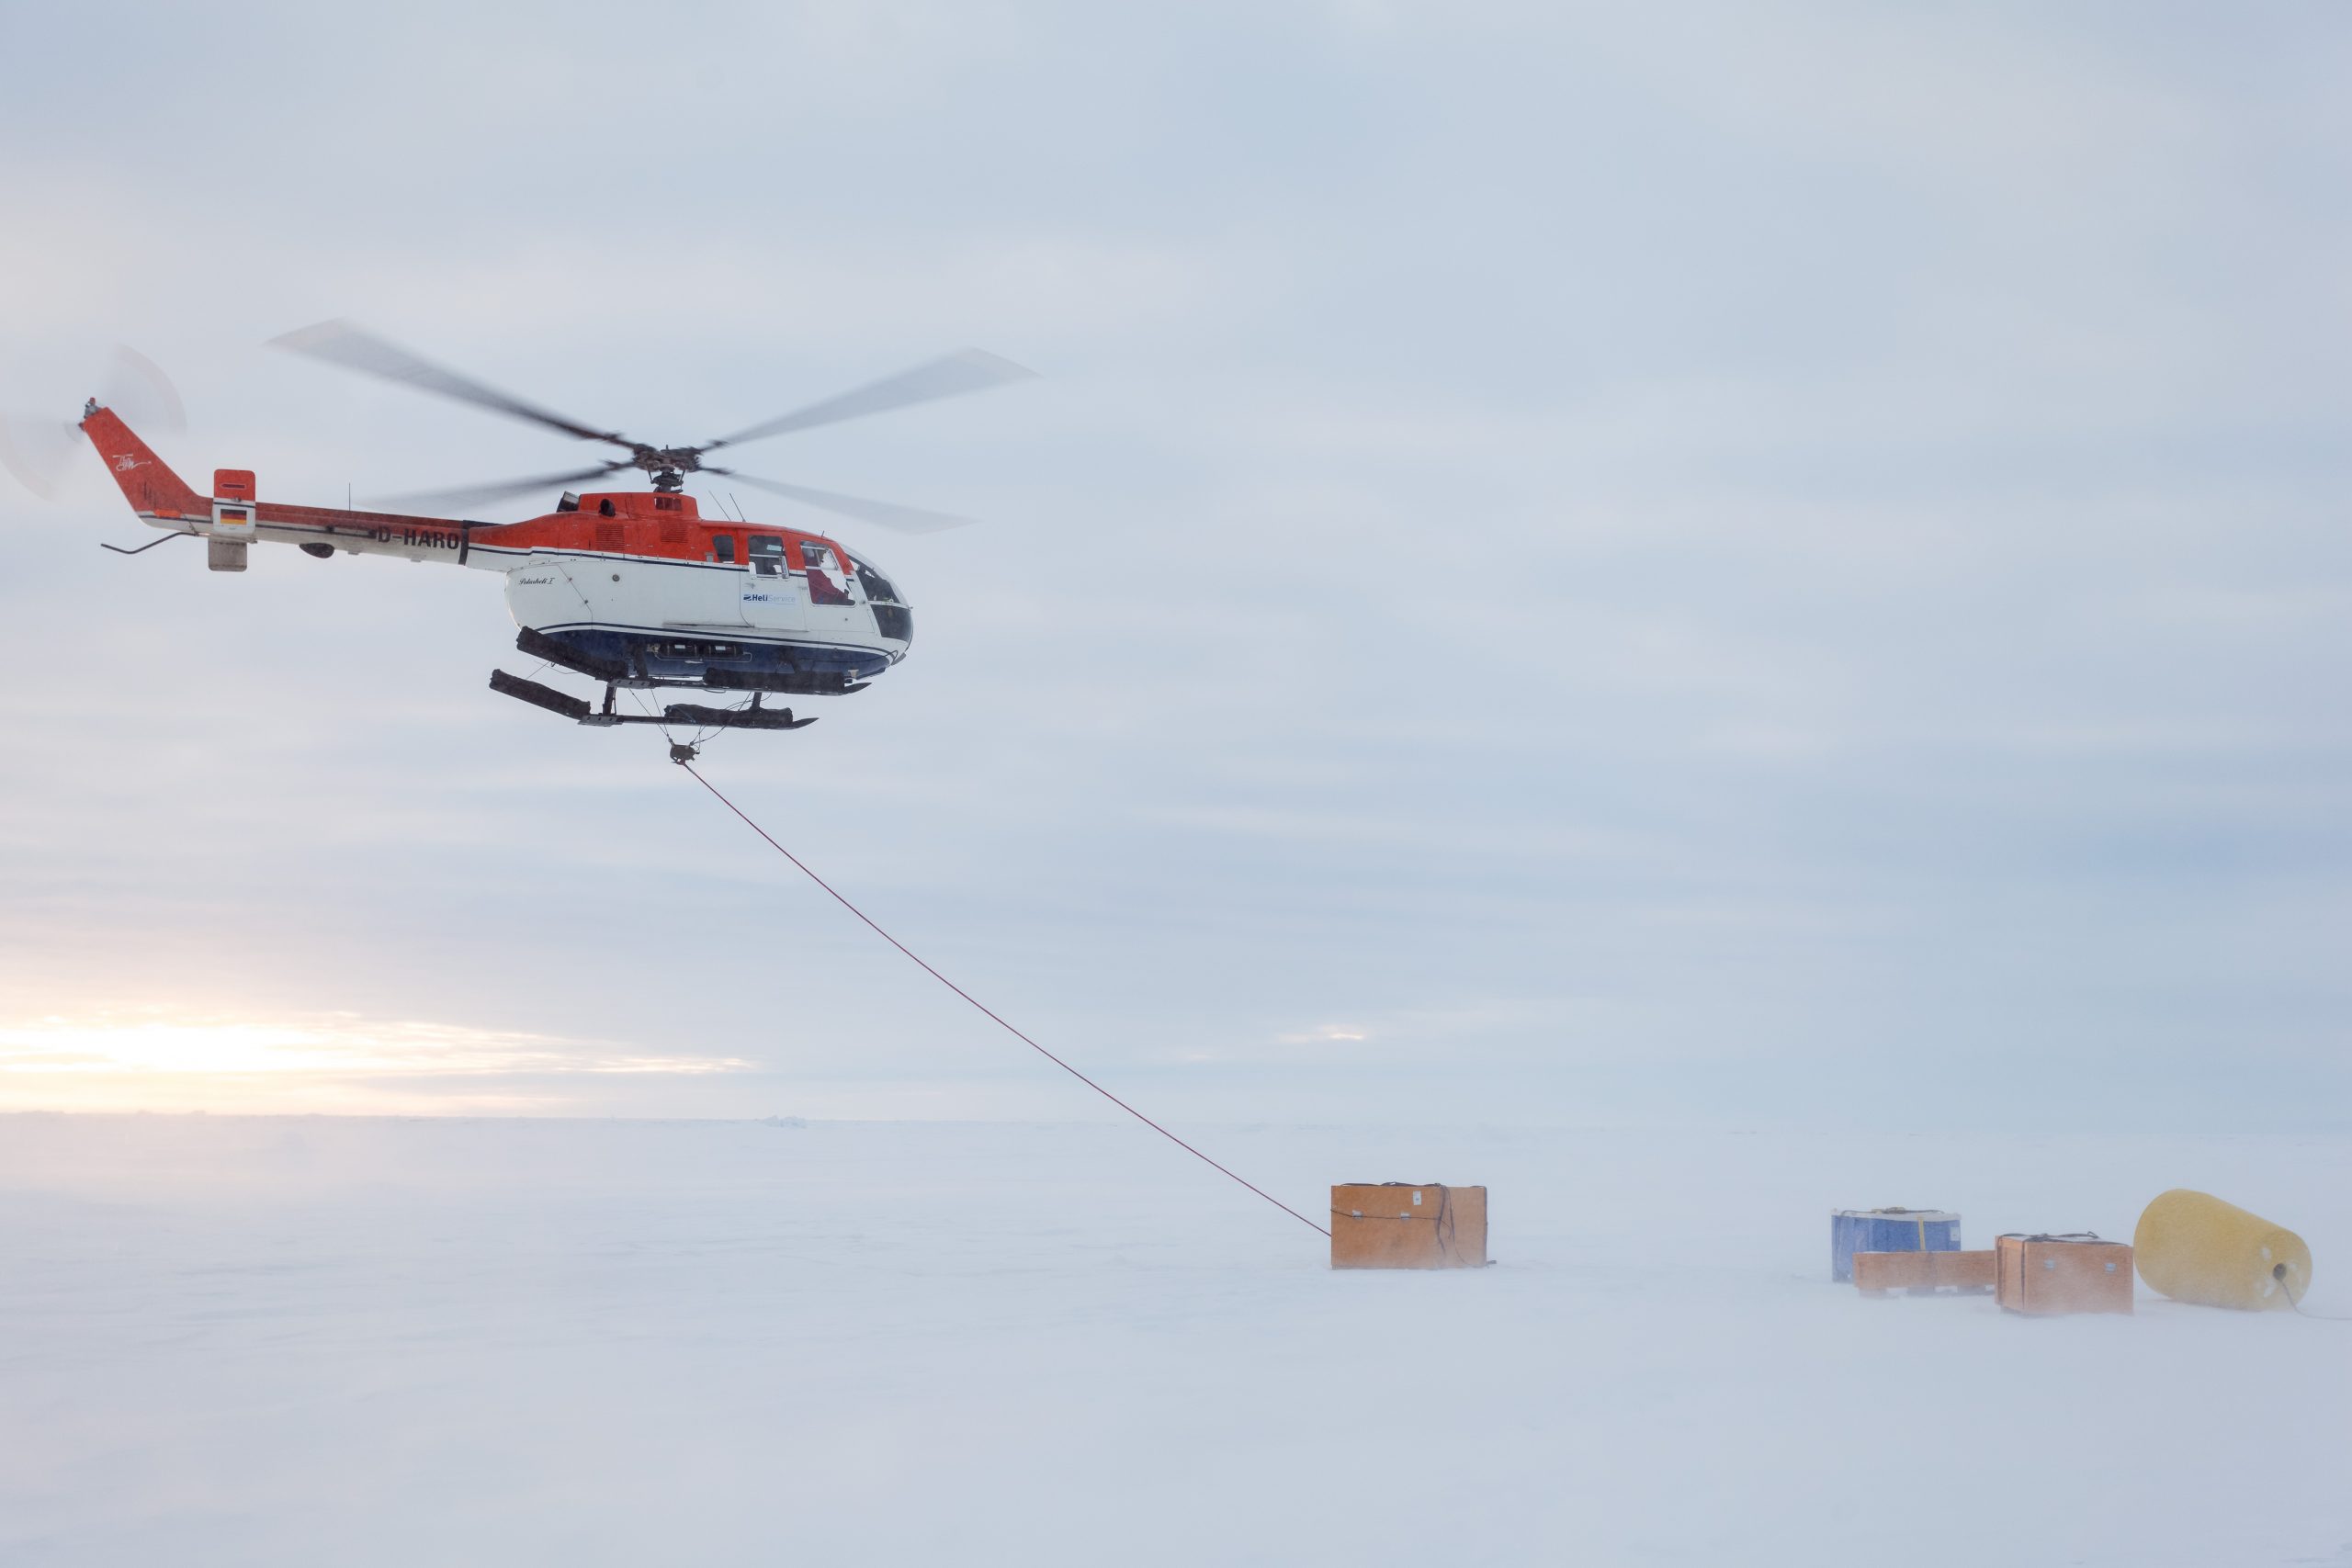 Transport of ITP gear to the deployment site by helicopter.  (Photo by Mario Hoppmann)